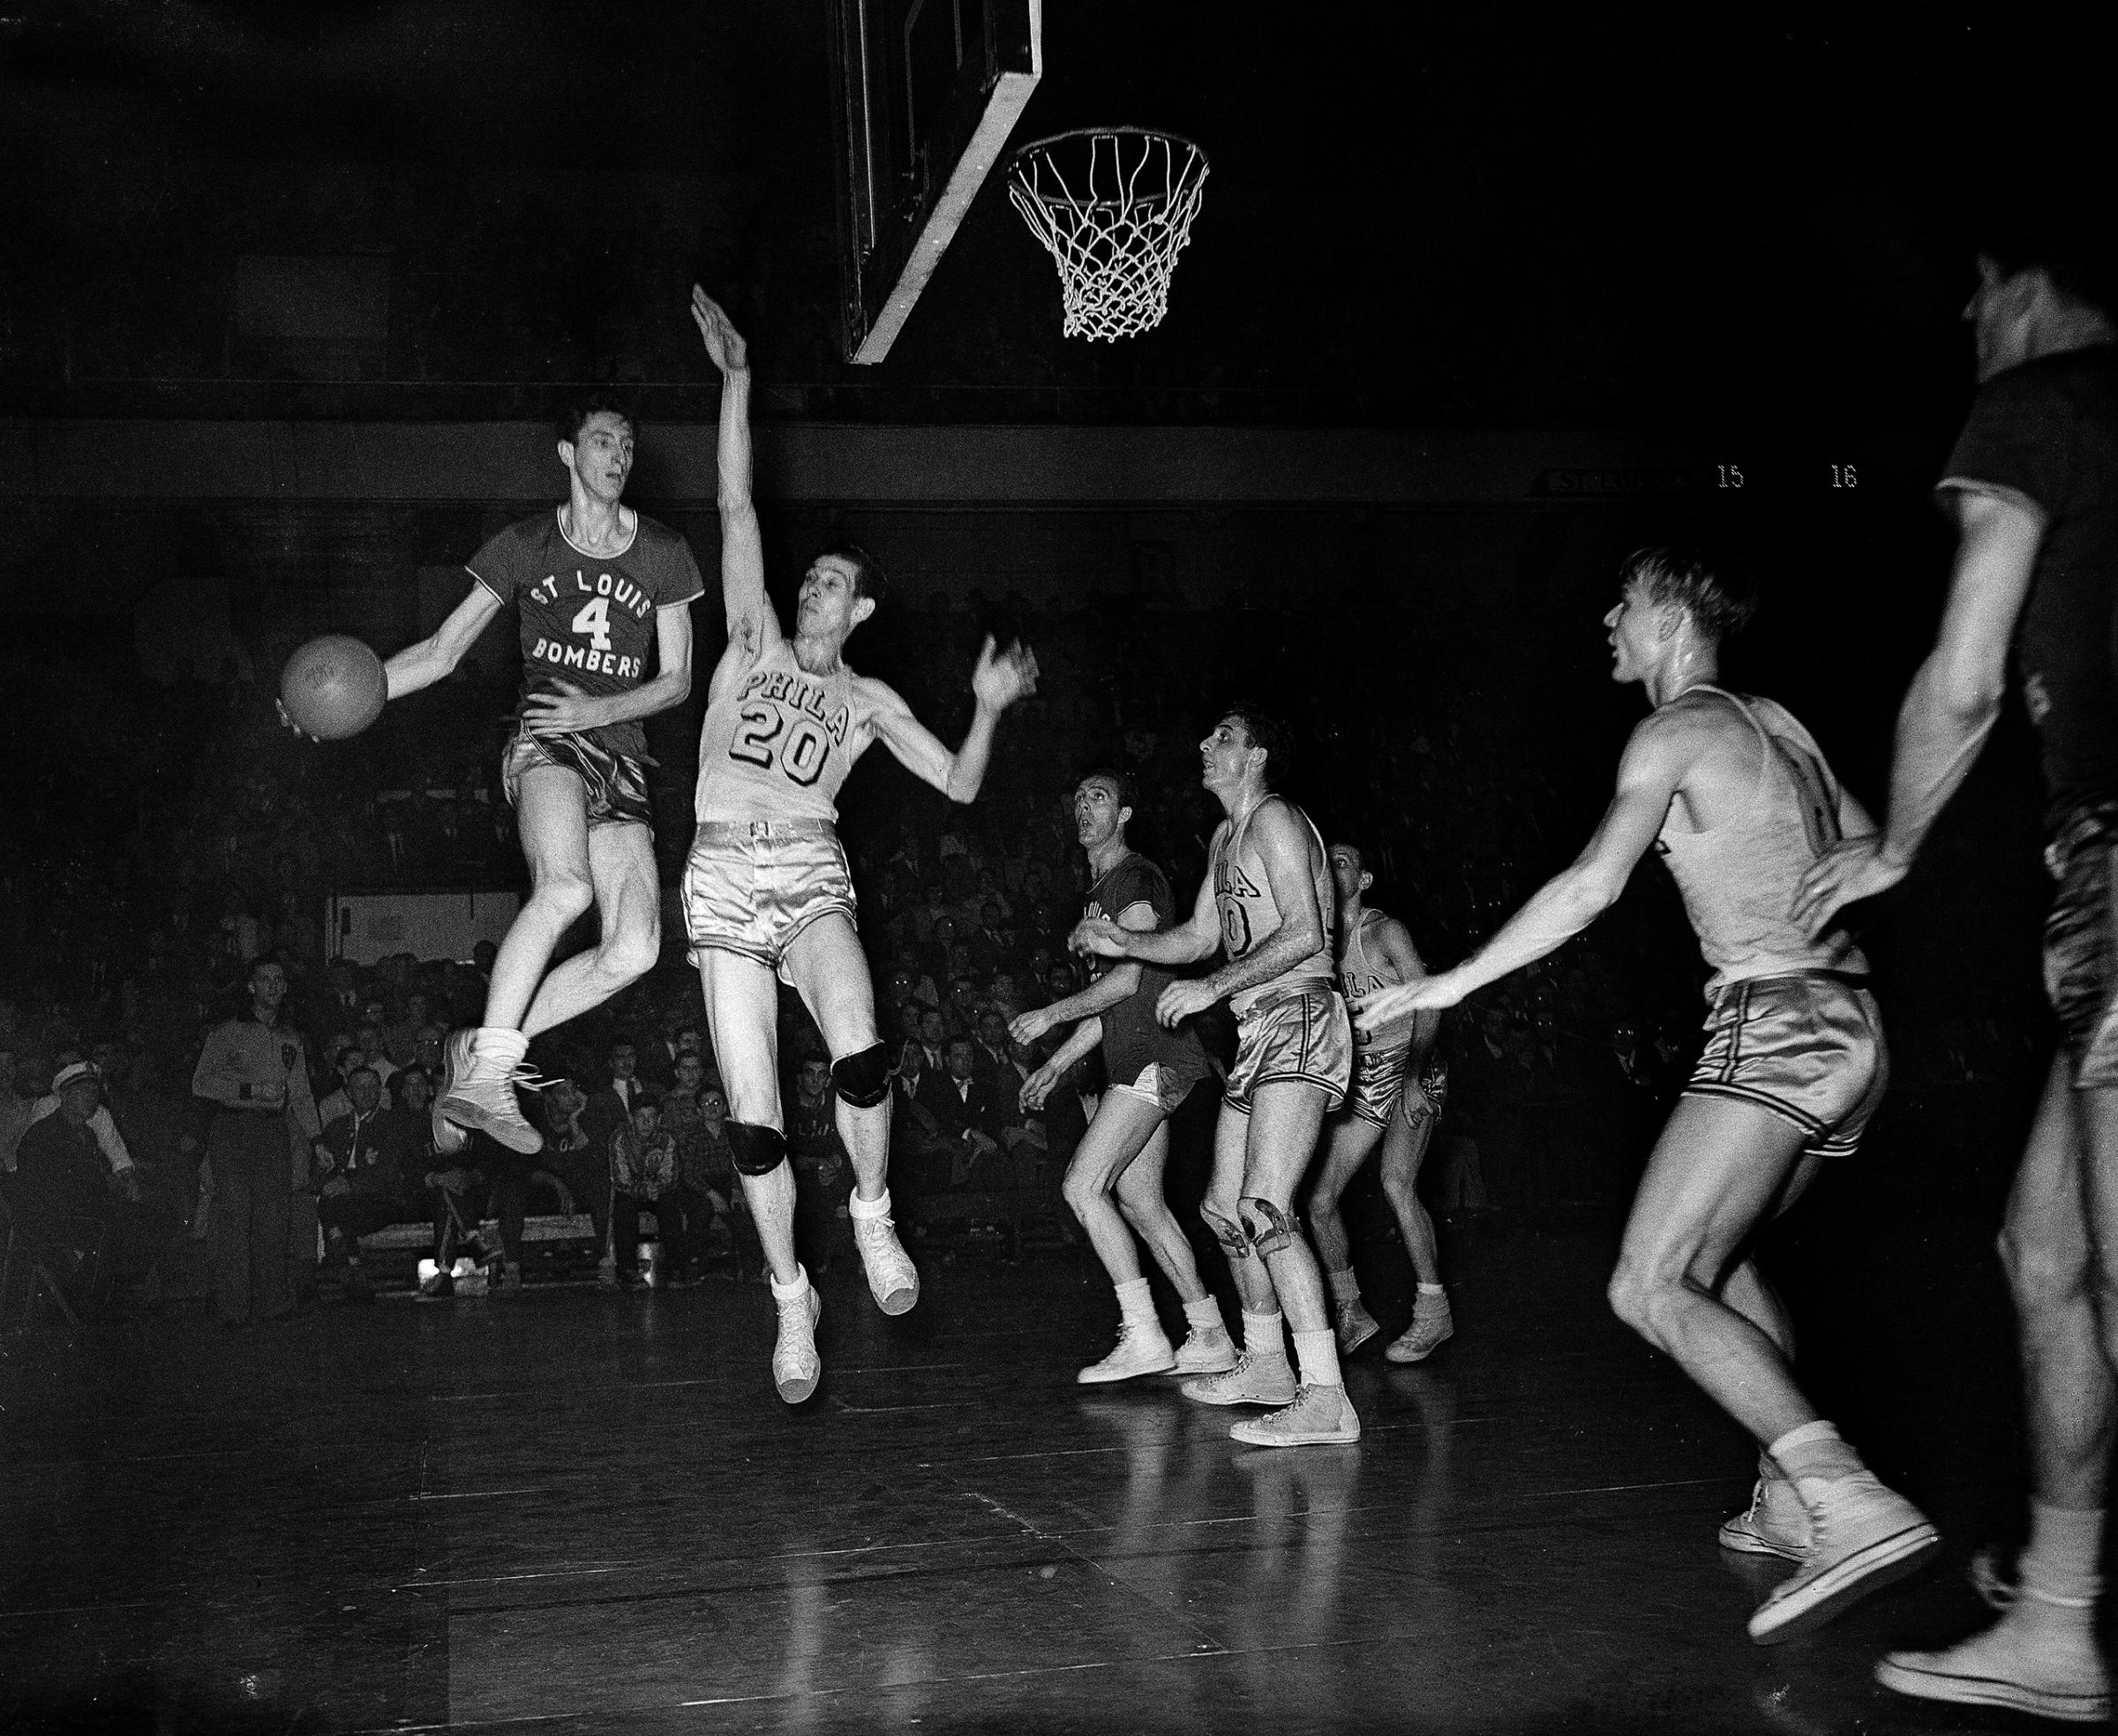 Red Rocha (4), St. Louis Bombers center, goes up in the air to make a pass in Basketball Association of America playoff game with the Philadelphia Warriors at the Arena, March 30, 1948. Chuck Halbert, lanky Warriors center, also leaves the floor in an attempt to block the pass.